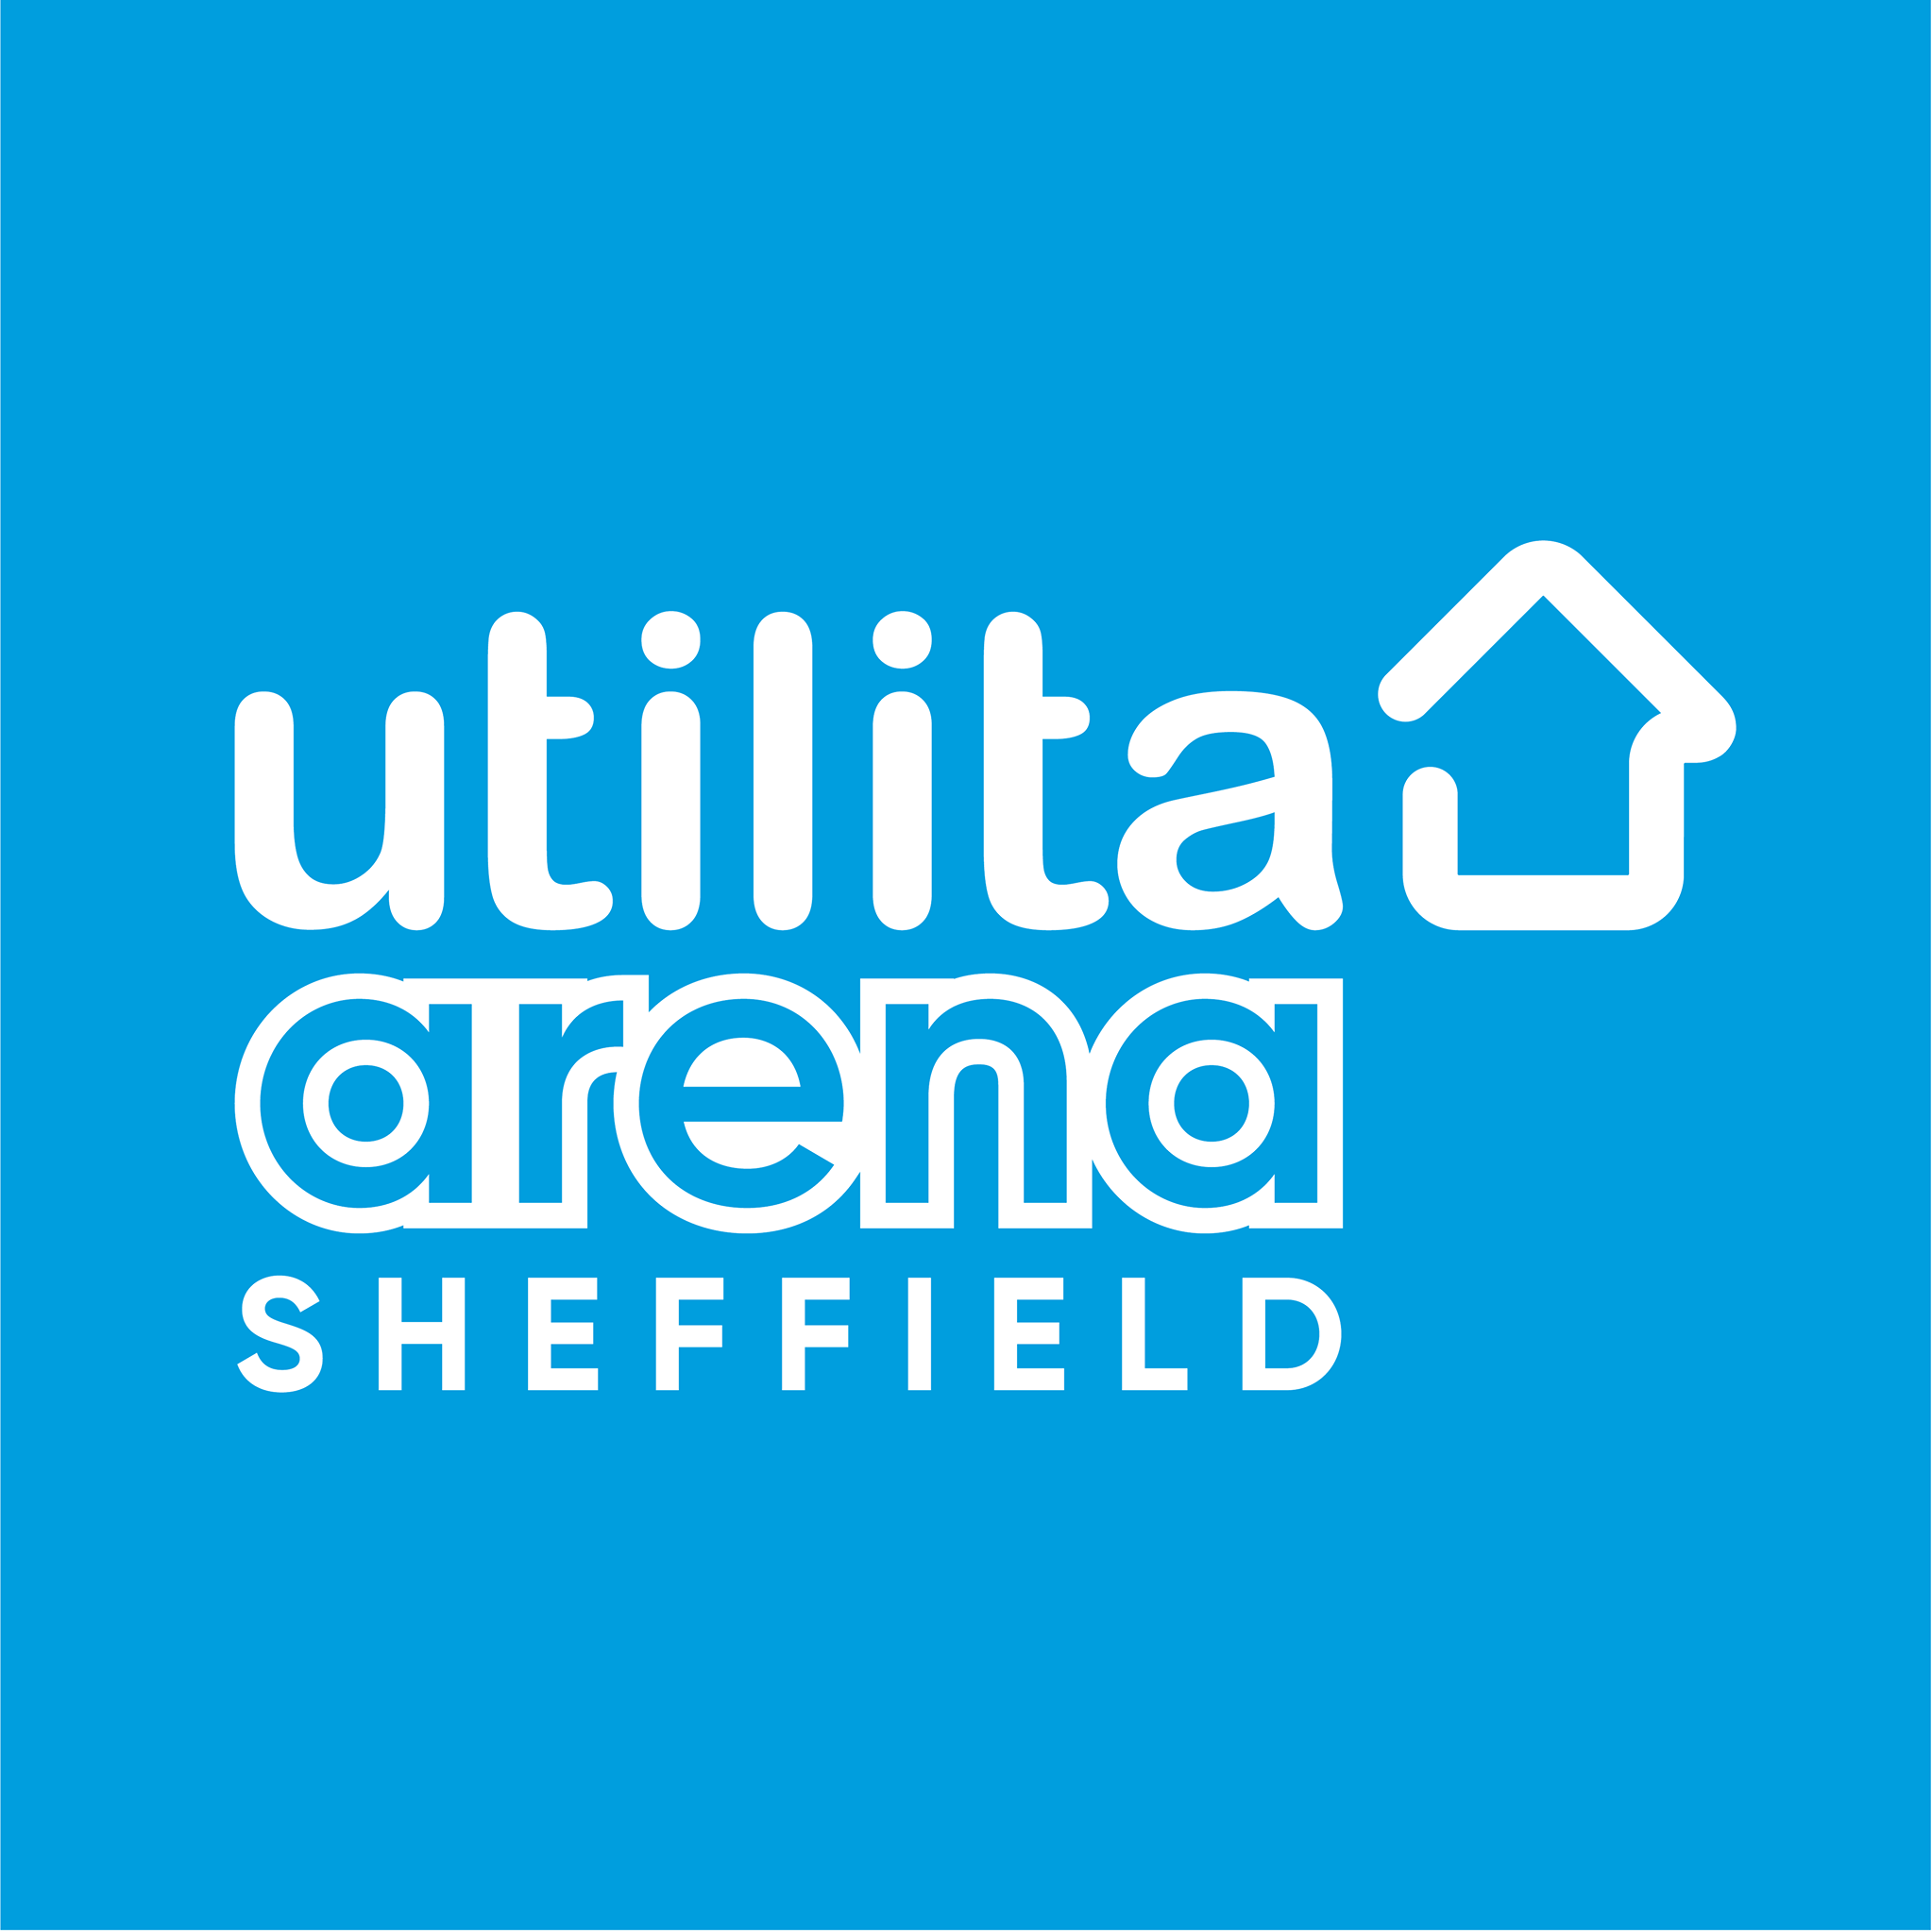 Les Miserables - The Arena Spectacular in der Utilita Arena Sheffield Tickets